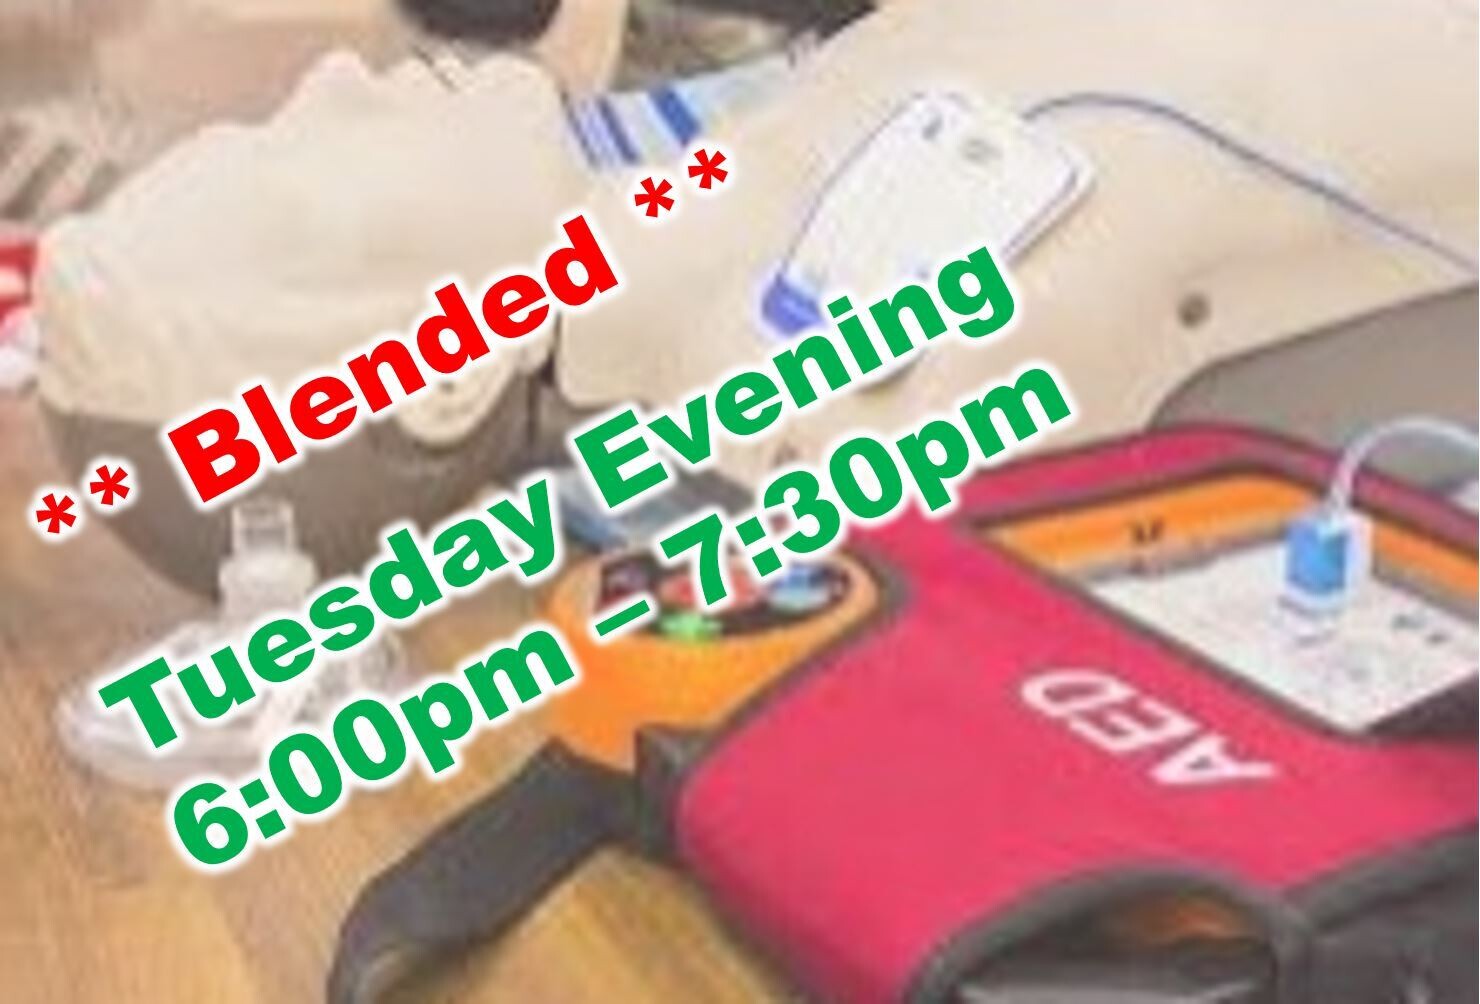 Mar. 22nd, 2022 (Tuesday) 6:00pm-7:30pm CPR Class